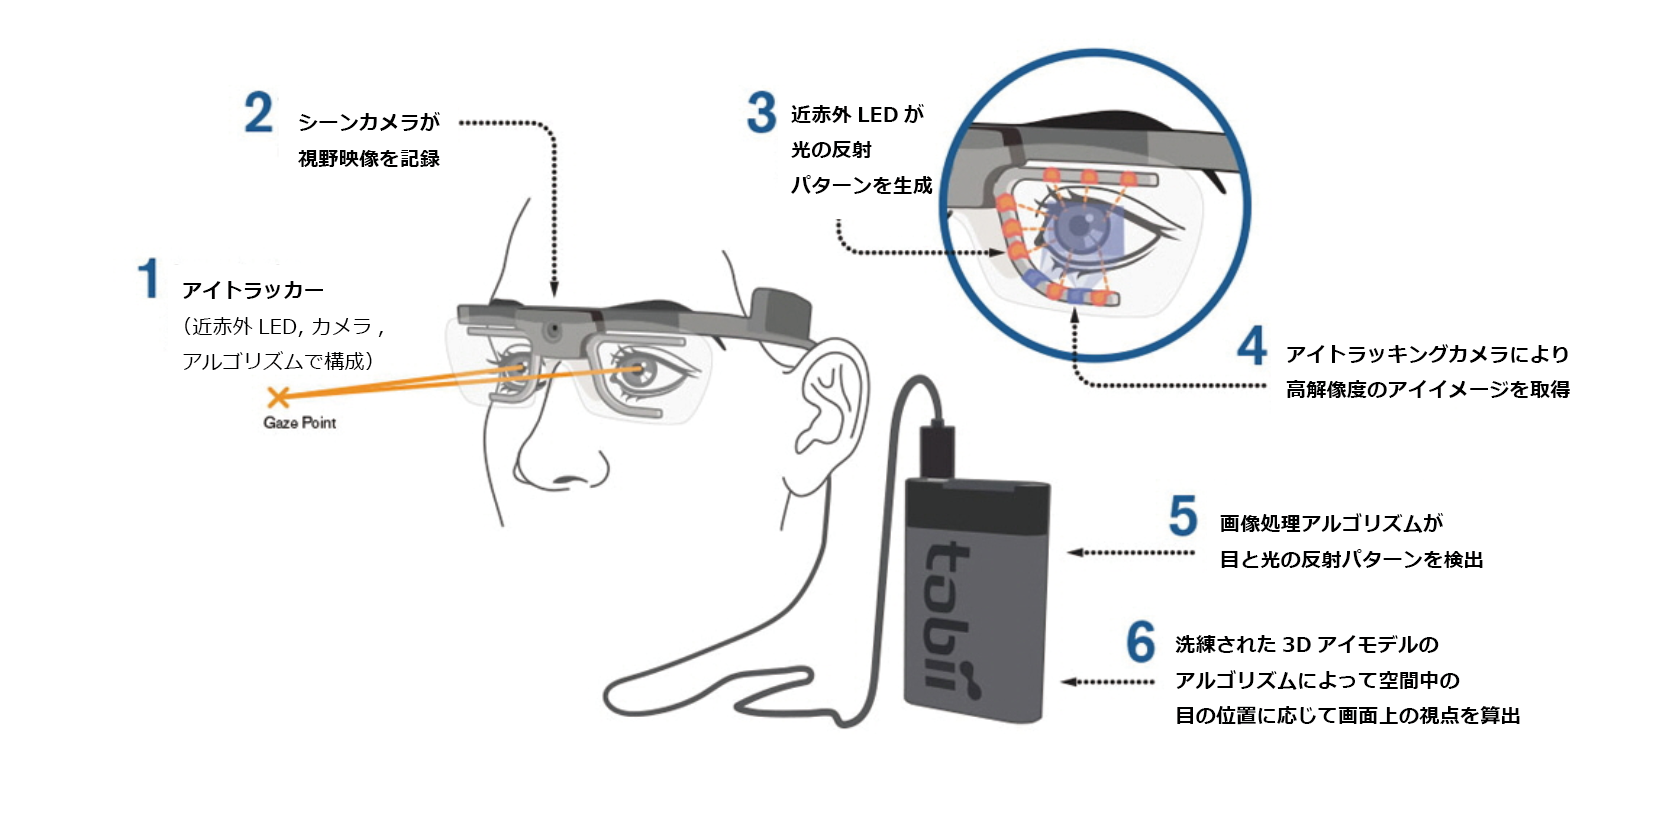 Explanation of how the wearable eye tracker works